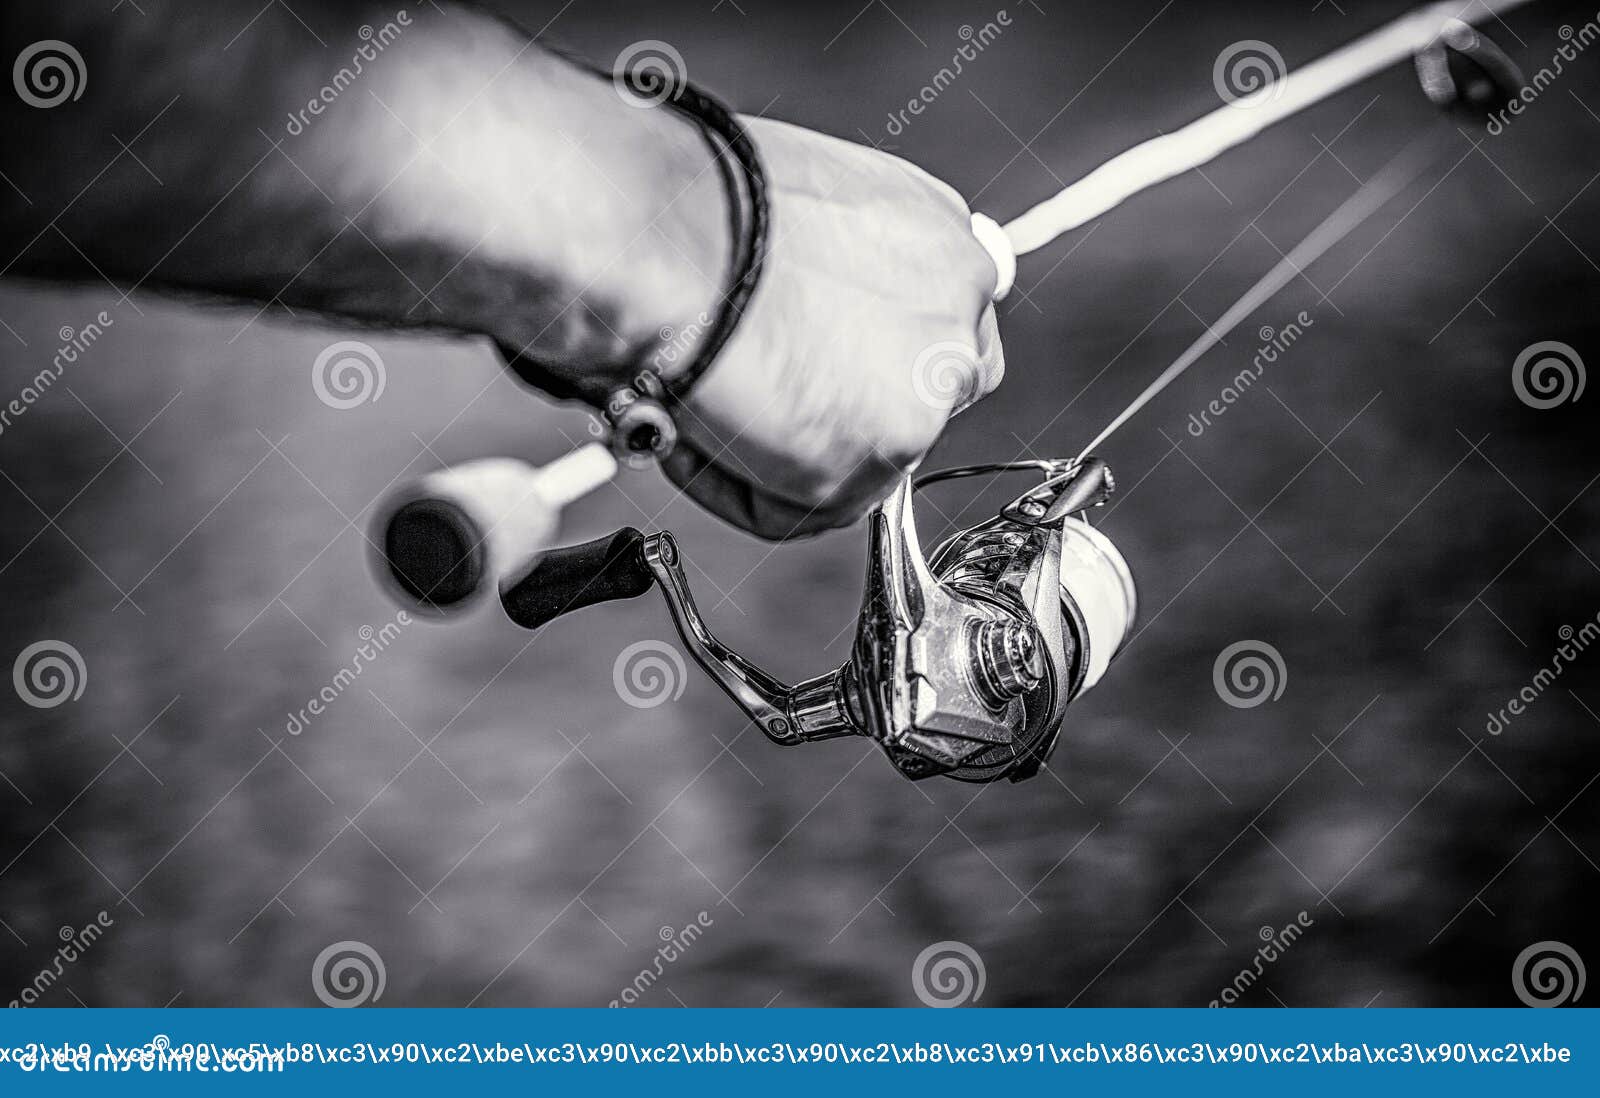 Fisherman Hand Holding Fishing Rod with Reel. Fishing Reel. Fishing Rod  with Aluminum Body Spool. Fishing Gear. Fish Stock Photo - Image of  equipment, hand: 259461680